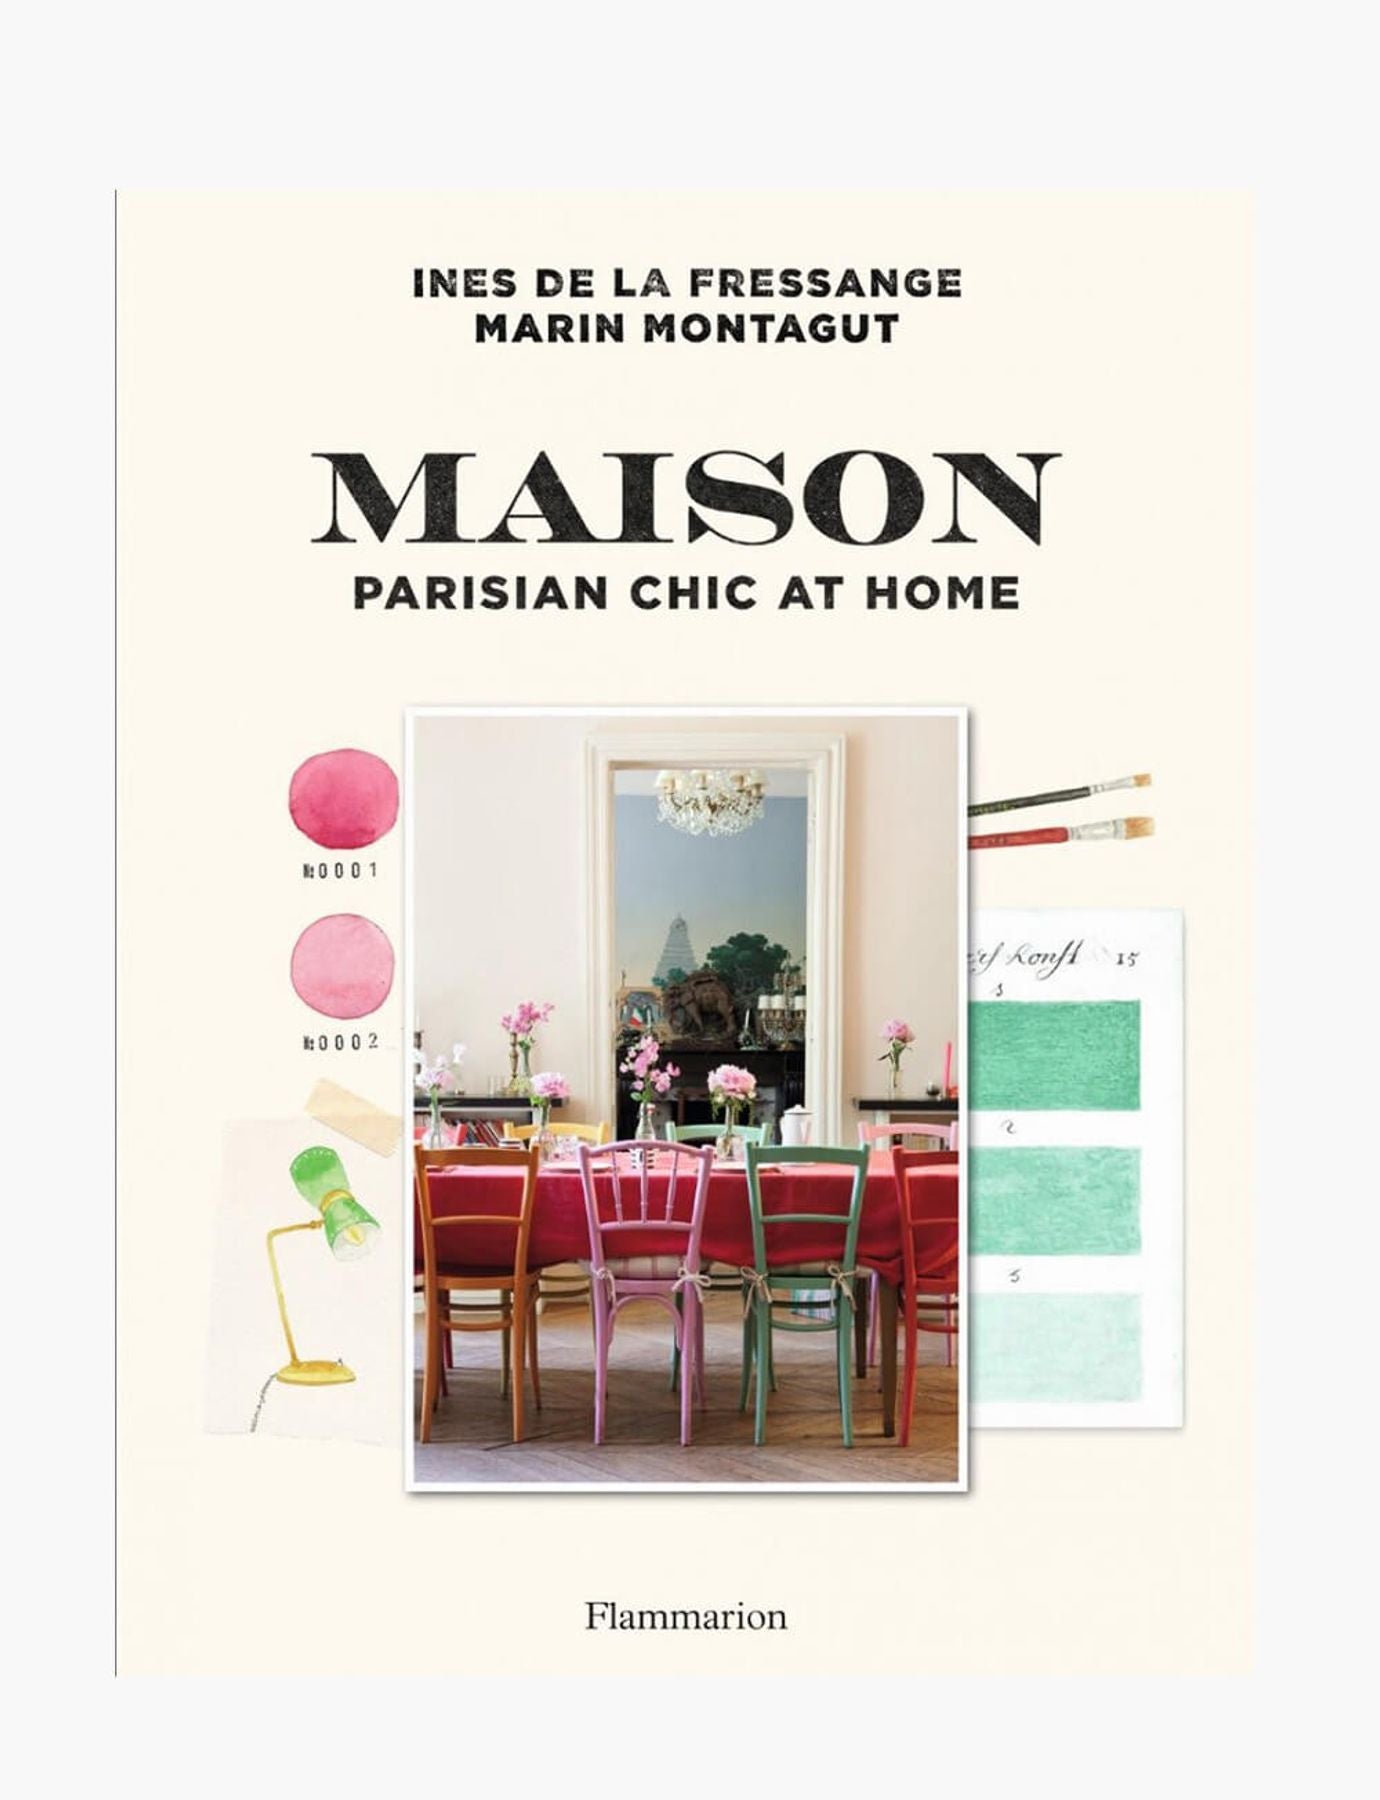 quot-maison-parisian-chic-at-home-quot-book-in-inglese